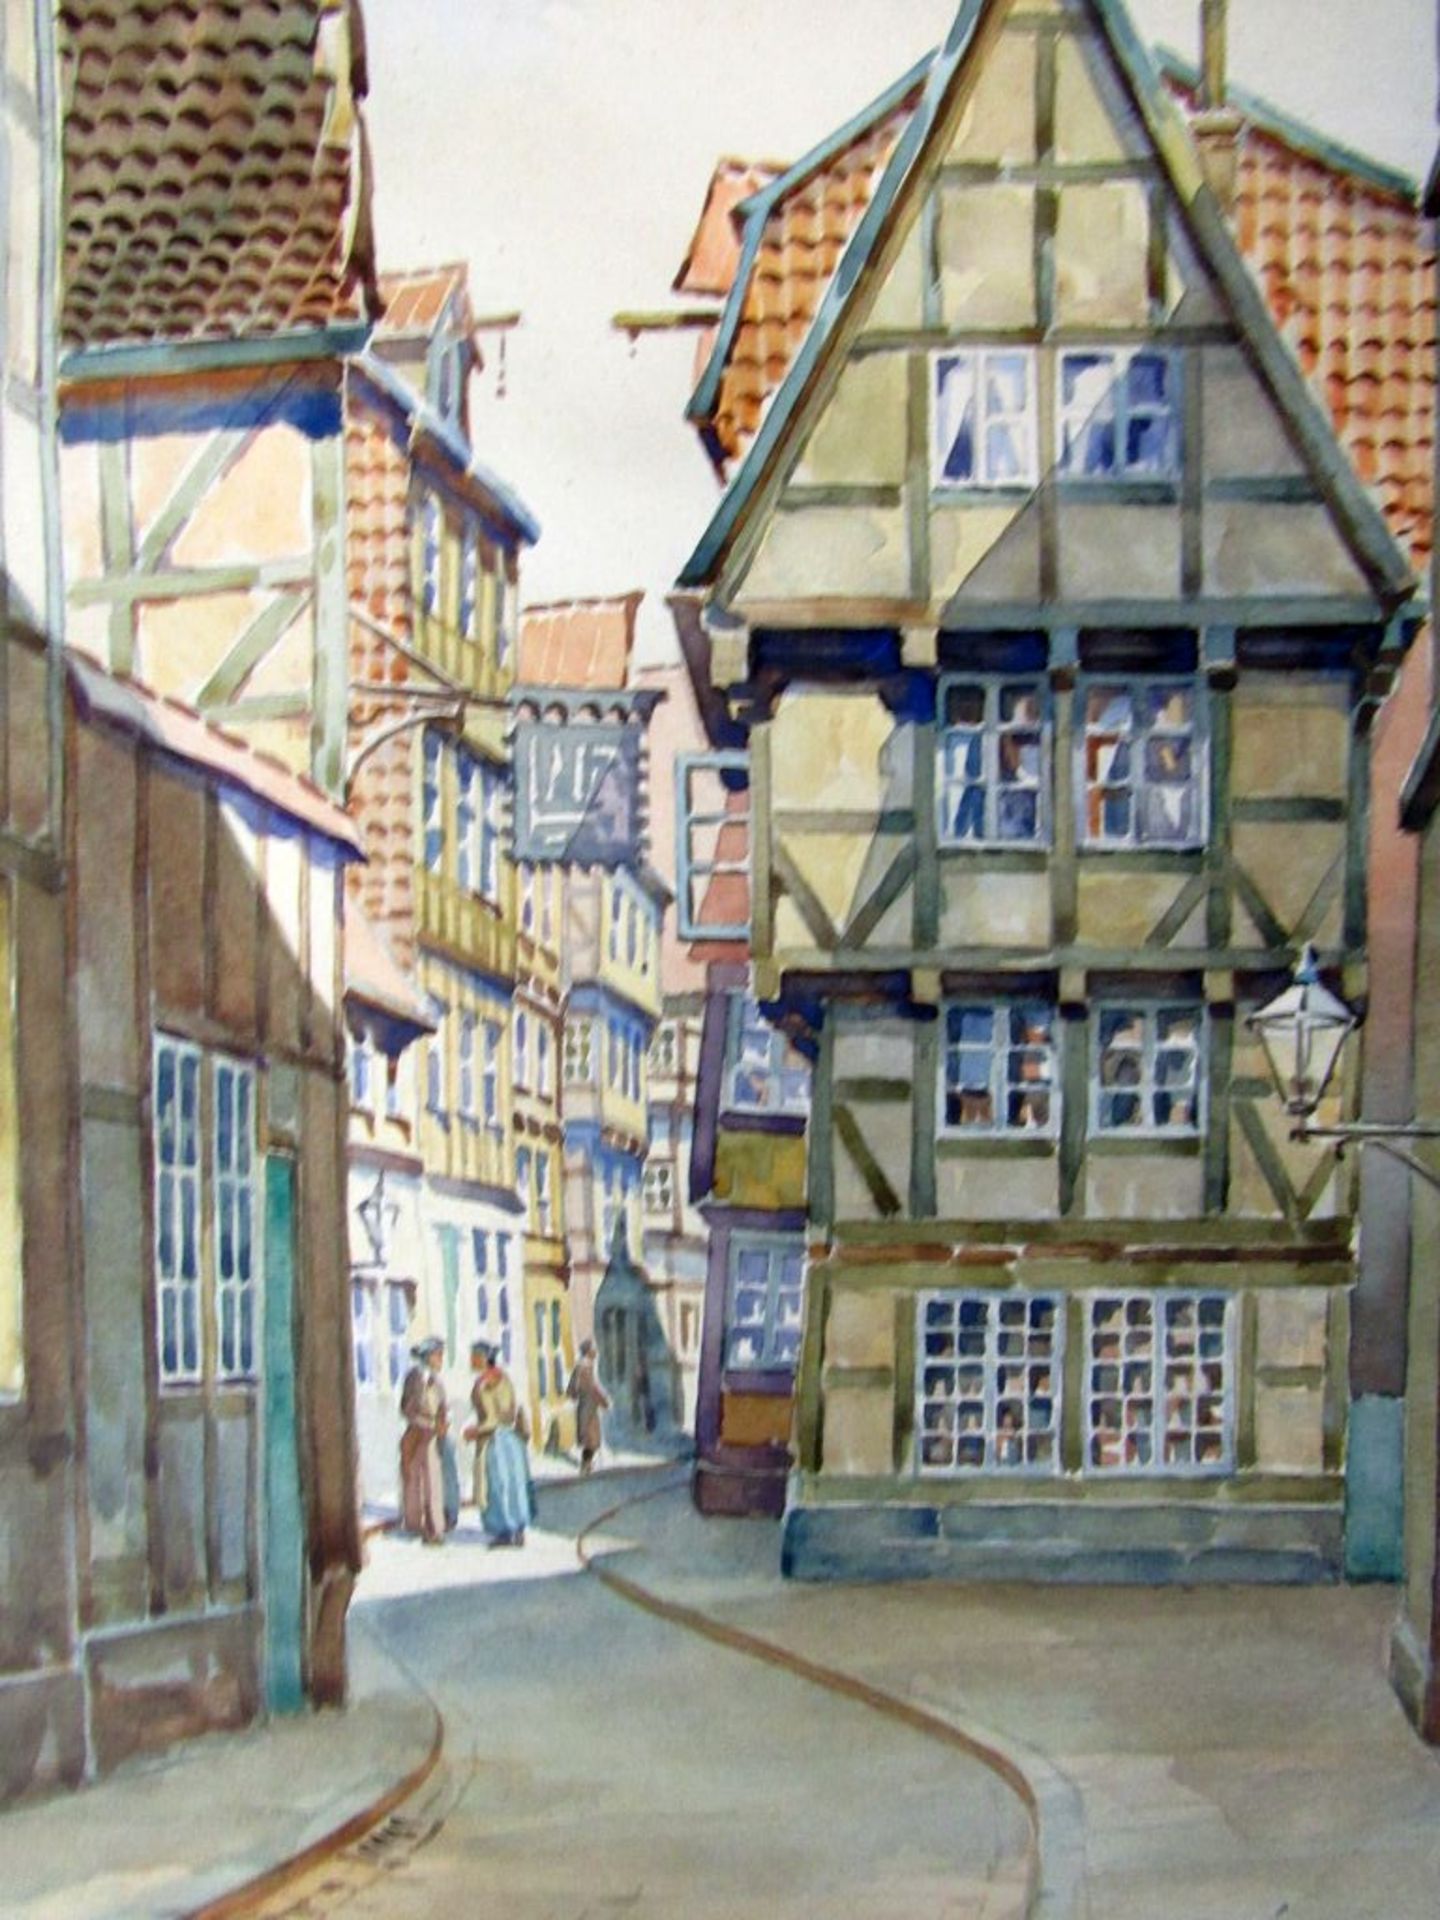 Aquarell Gasse in Hannover 53x44